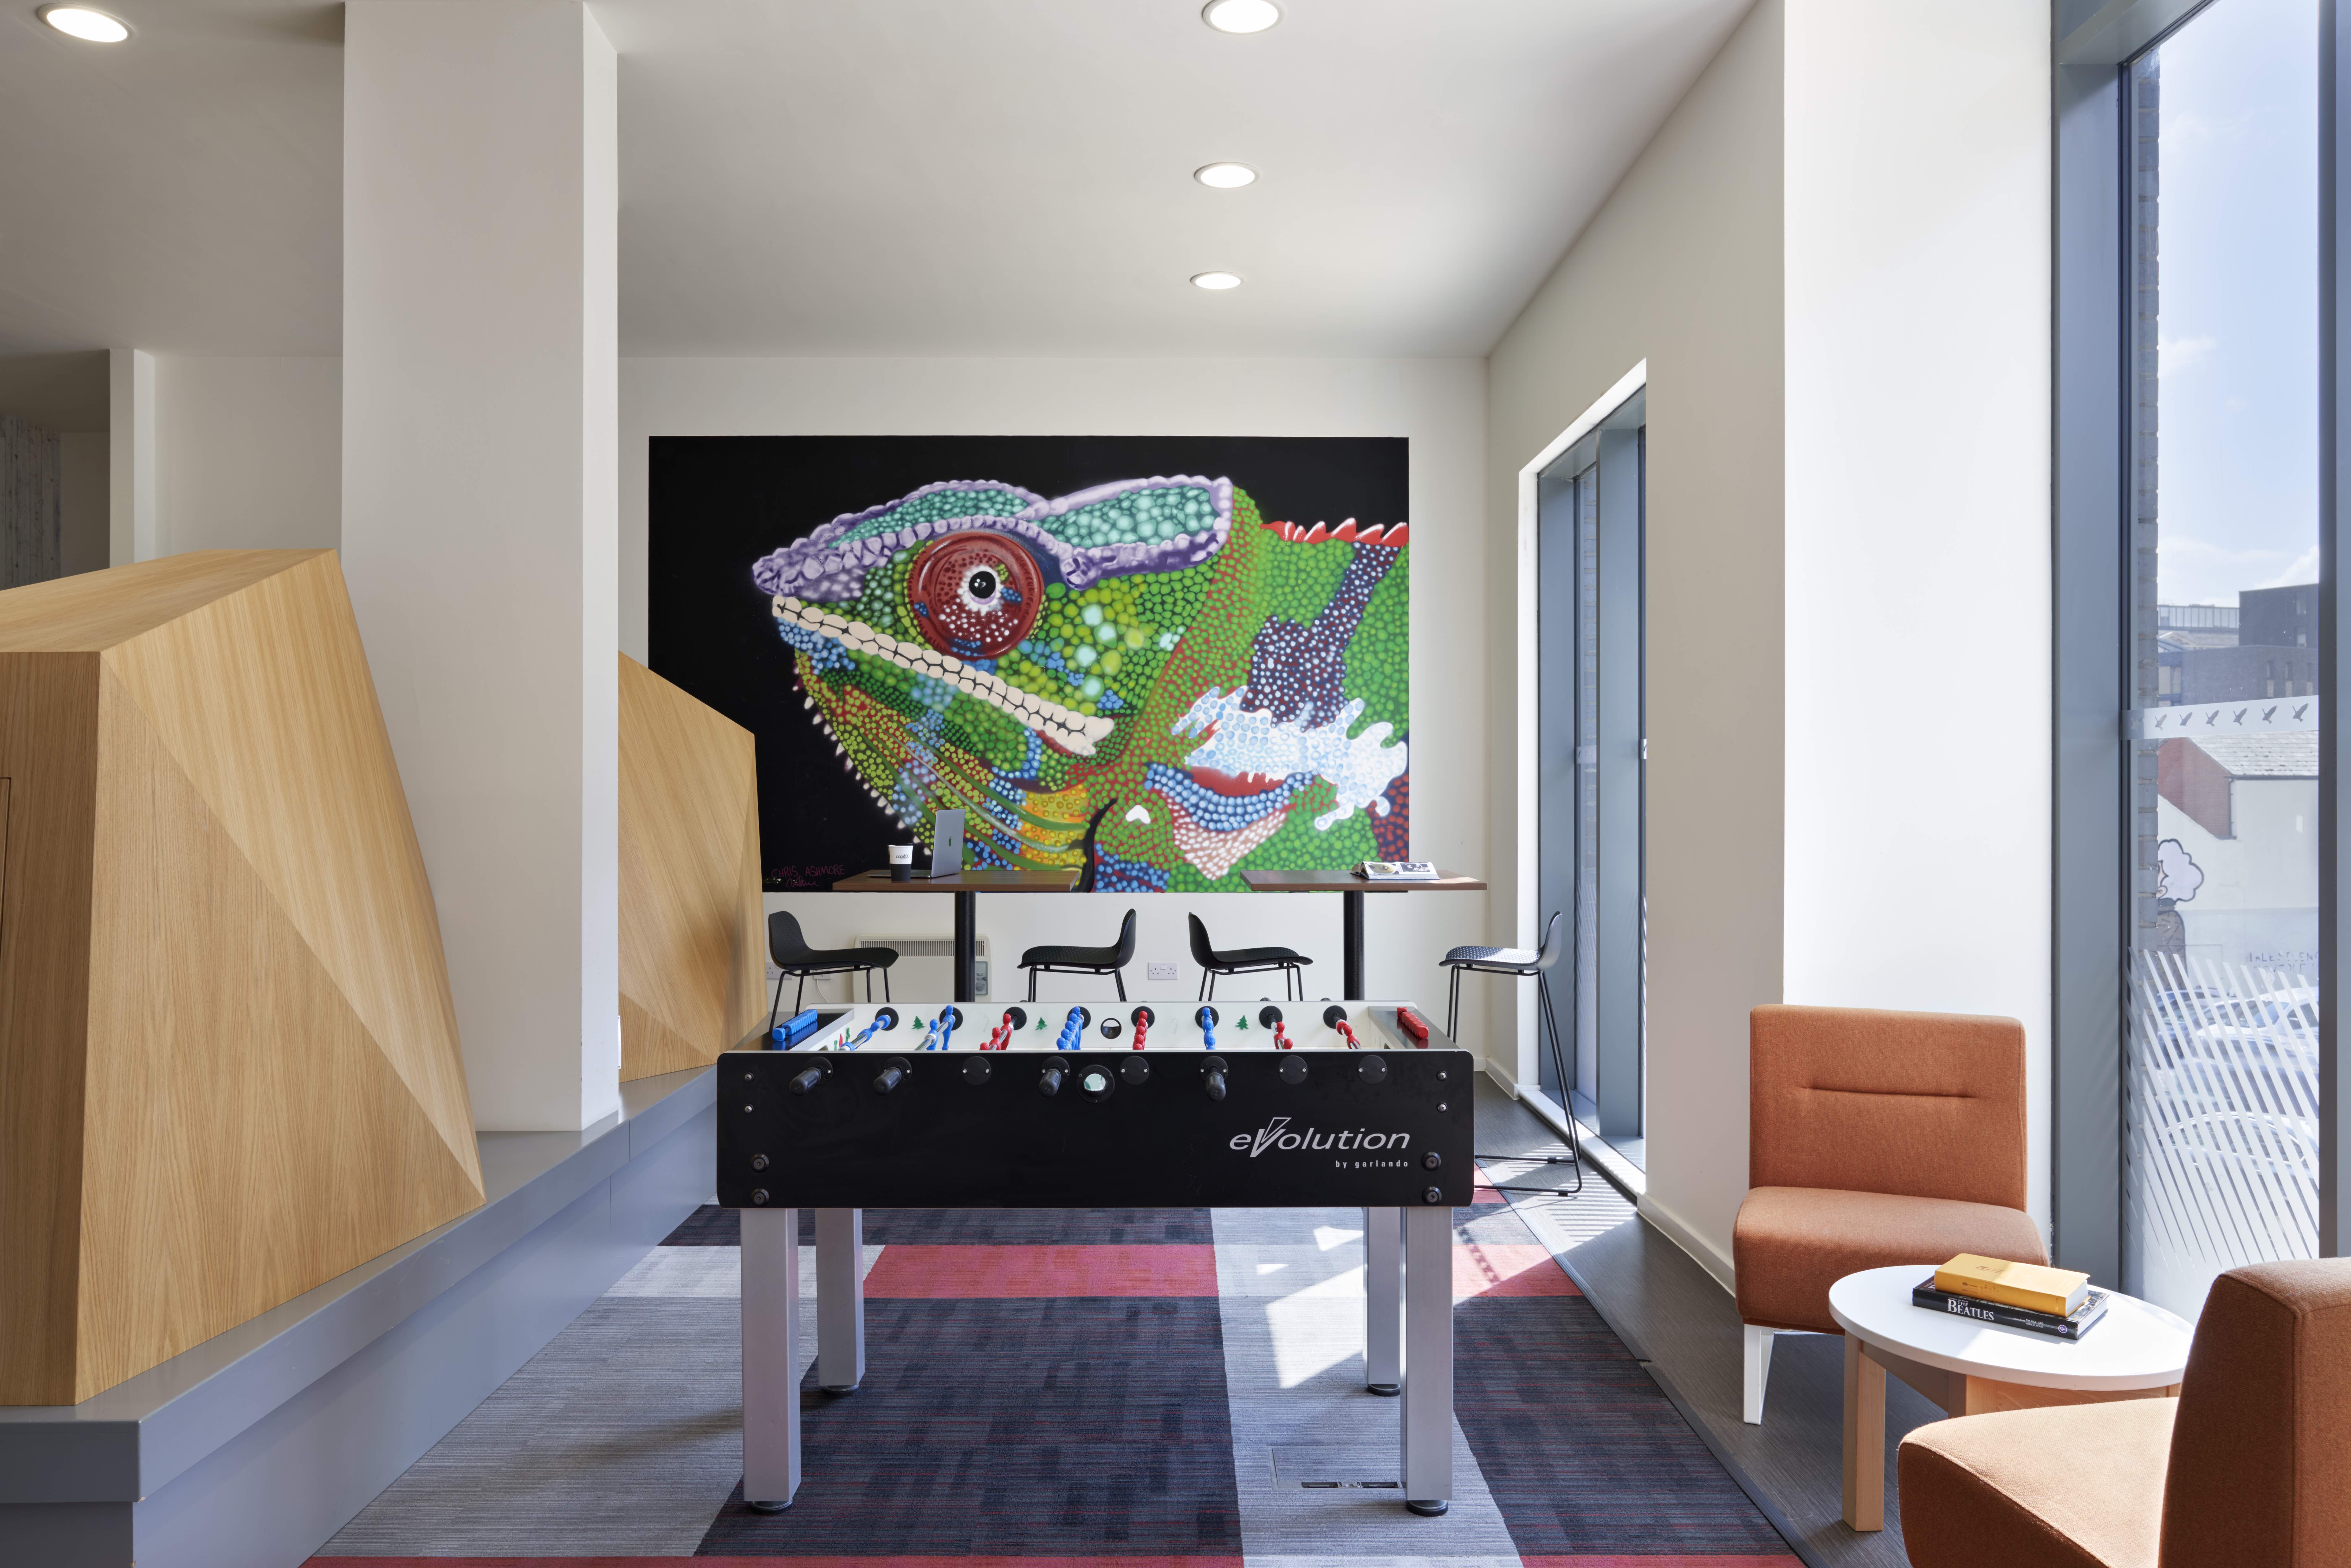 Sheffield student accommodation games area